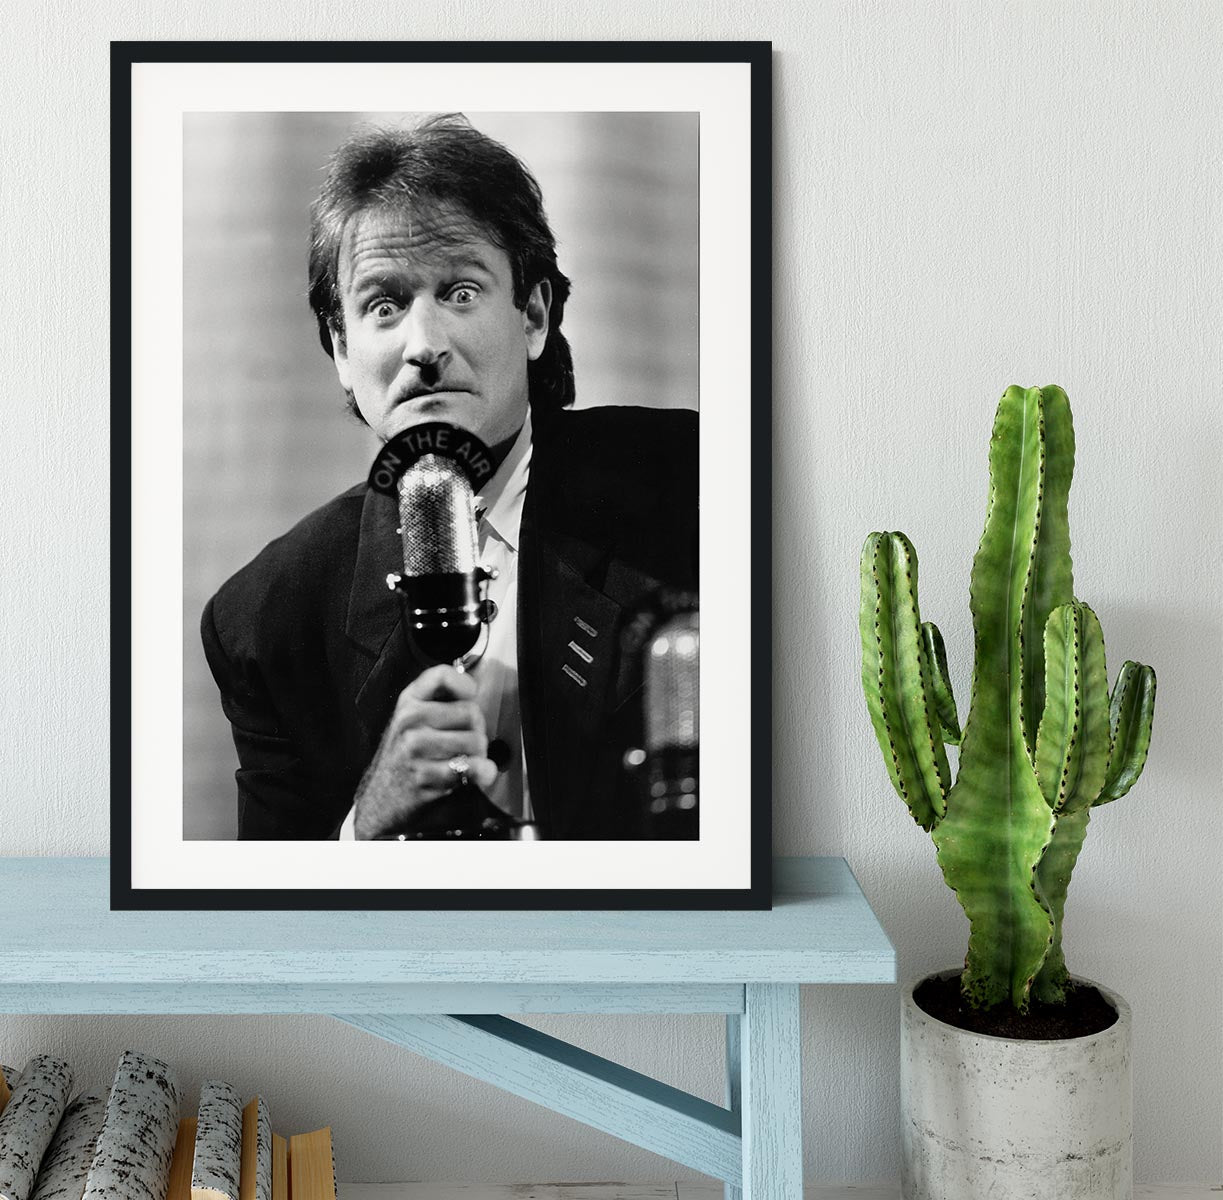 Robin Williams at the microphone Framed Print - Canvas Art Rocks - 1